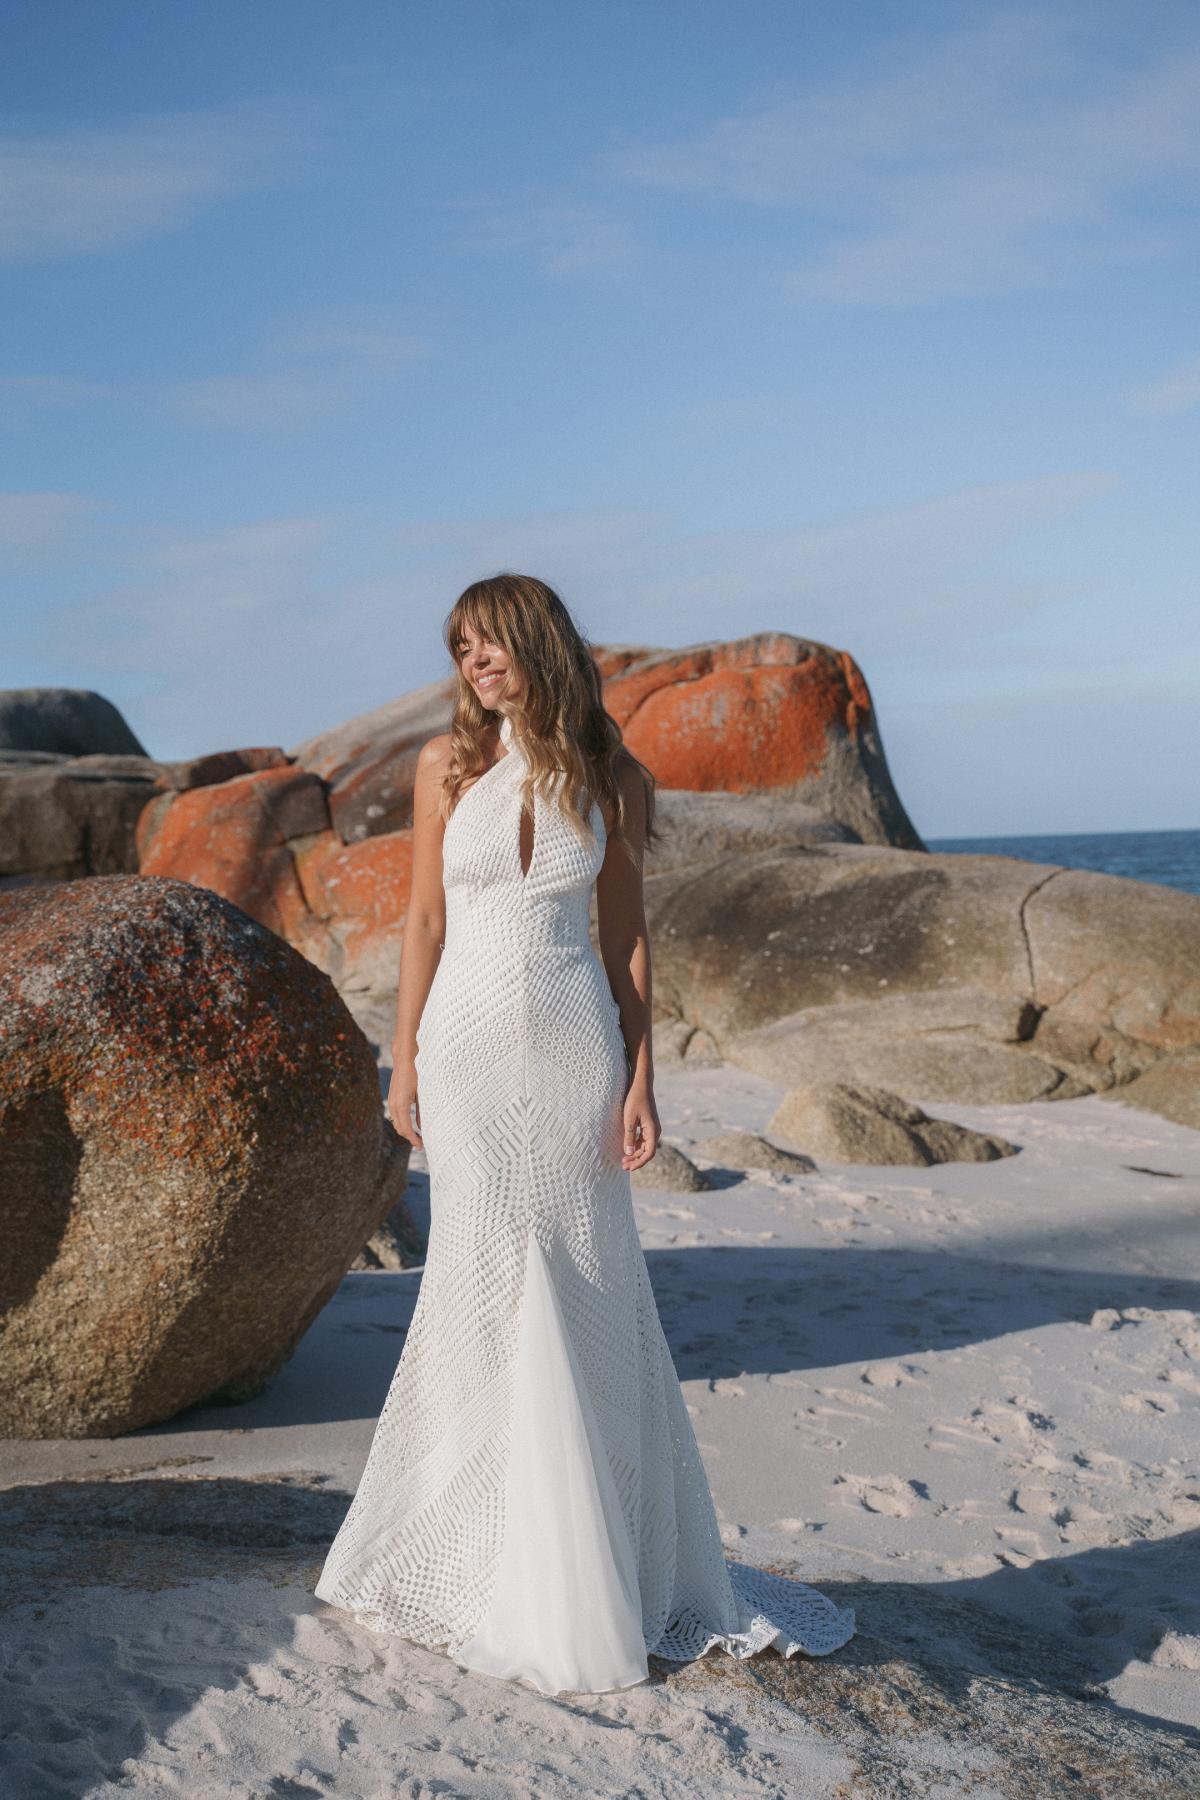 Chloe from Elope collection by Karen Willis Holmes-Lace halter neck gown on Christina Macpherson